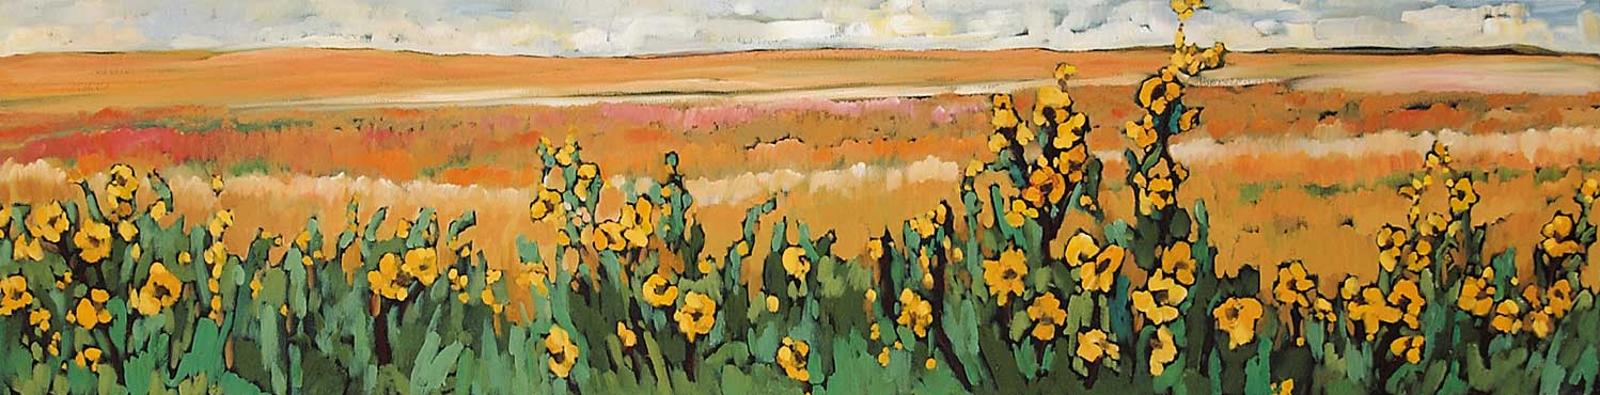 Phyllis J. Anderson - Wildflowers at Harvest Time